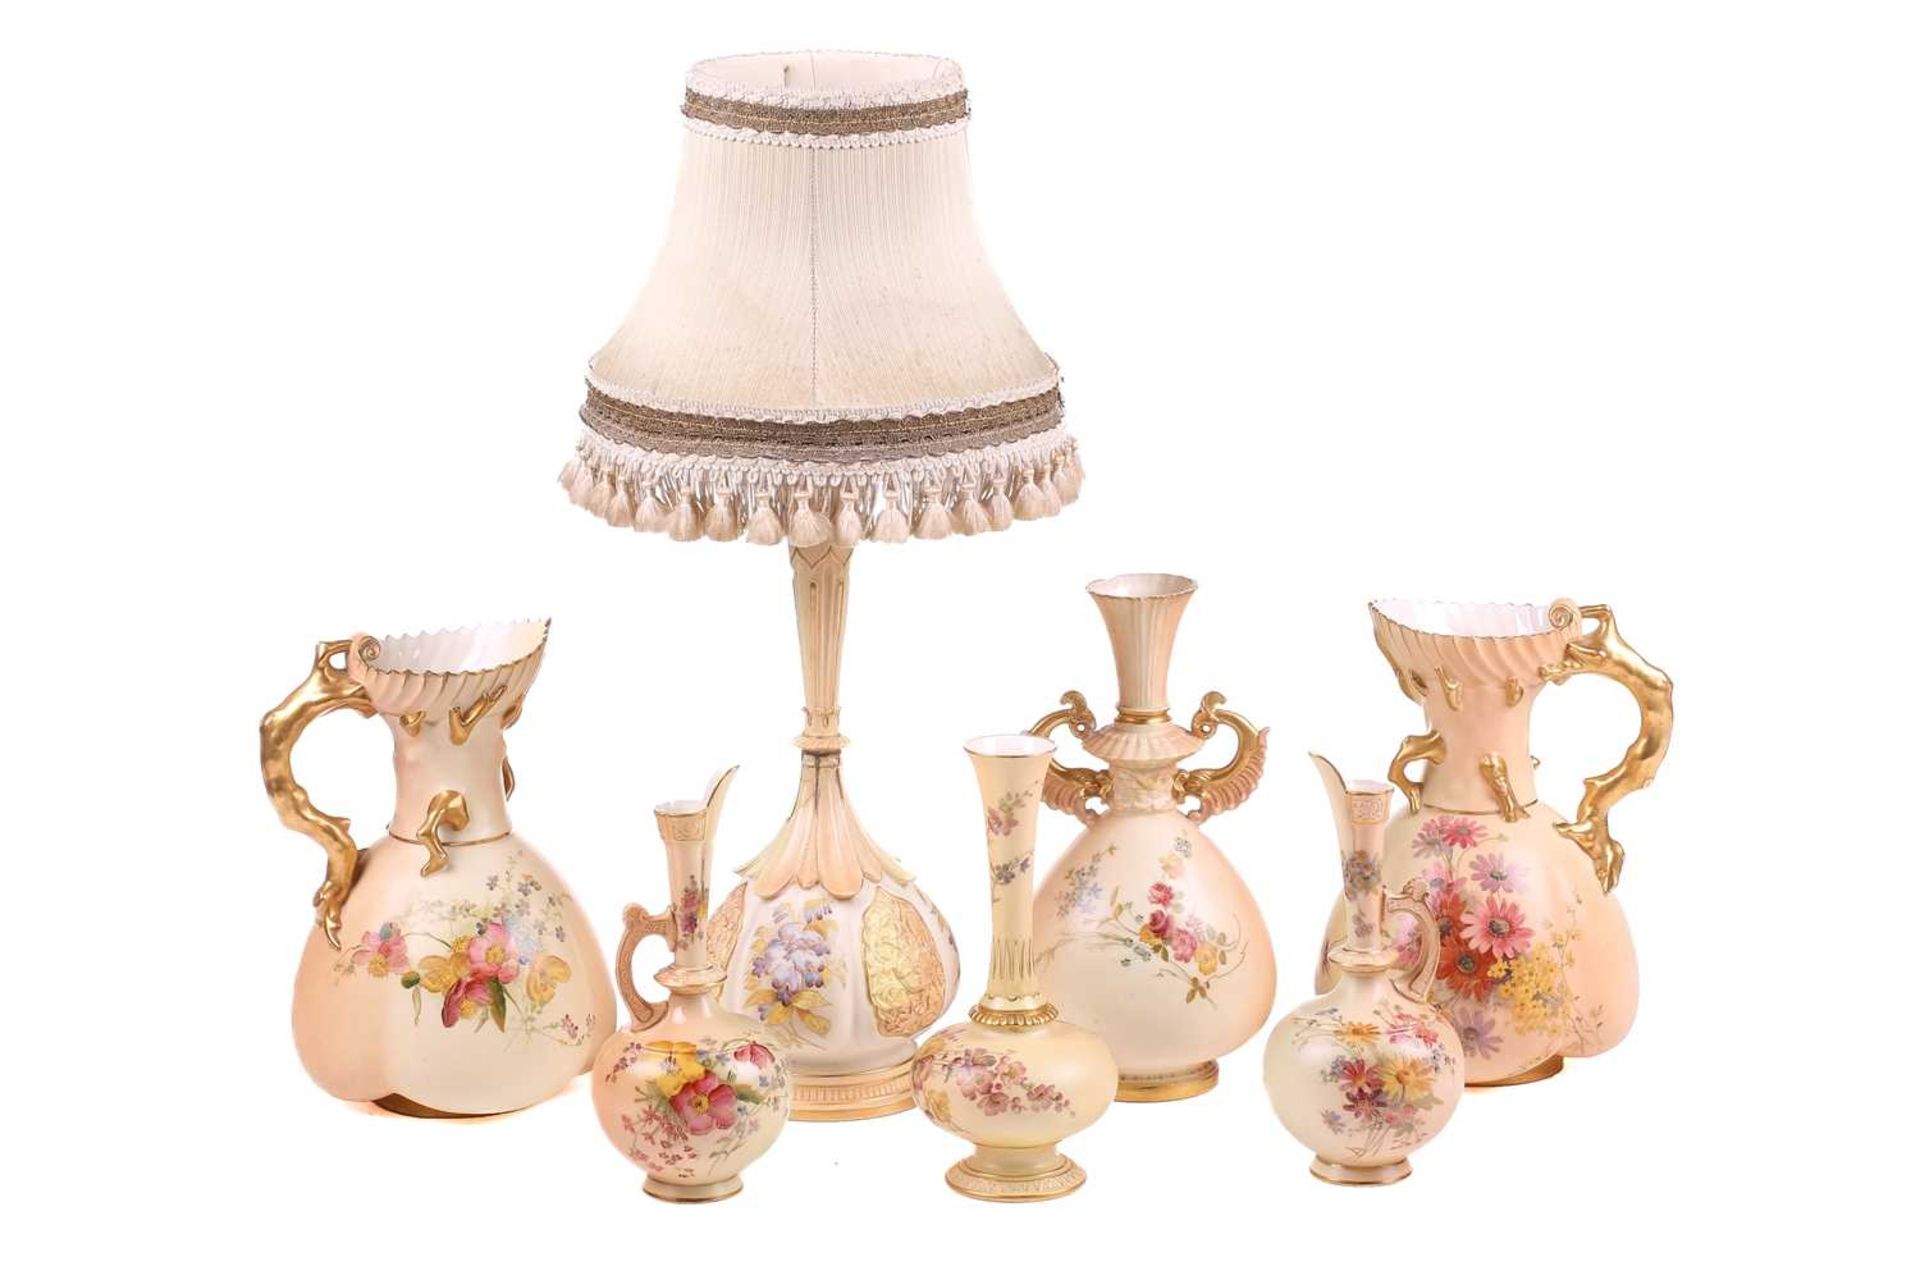 A collection of early 20th century Royal Worcester blush ivory ceramics, each with floral